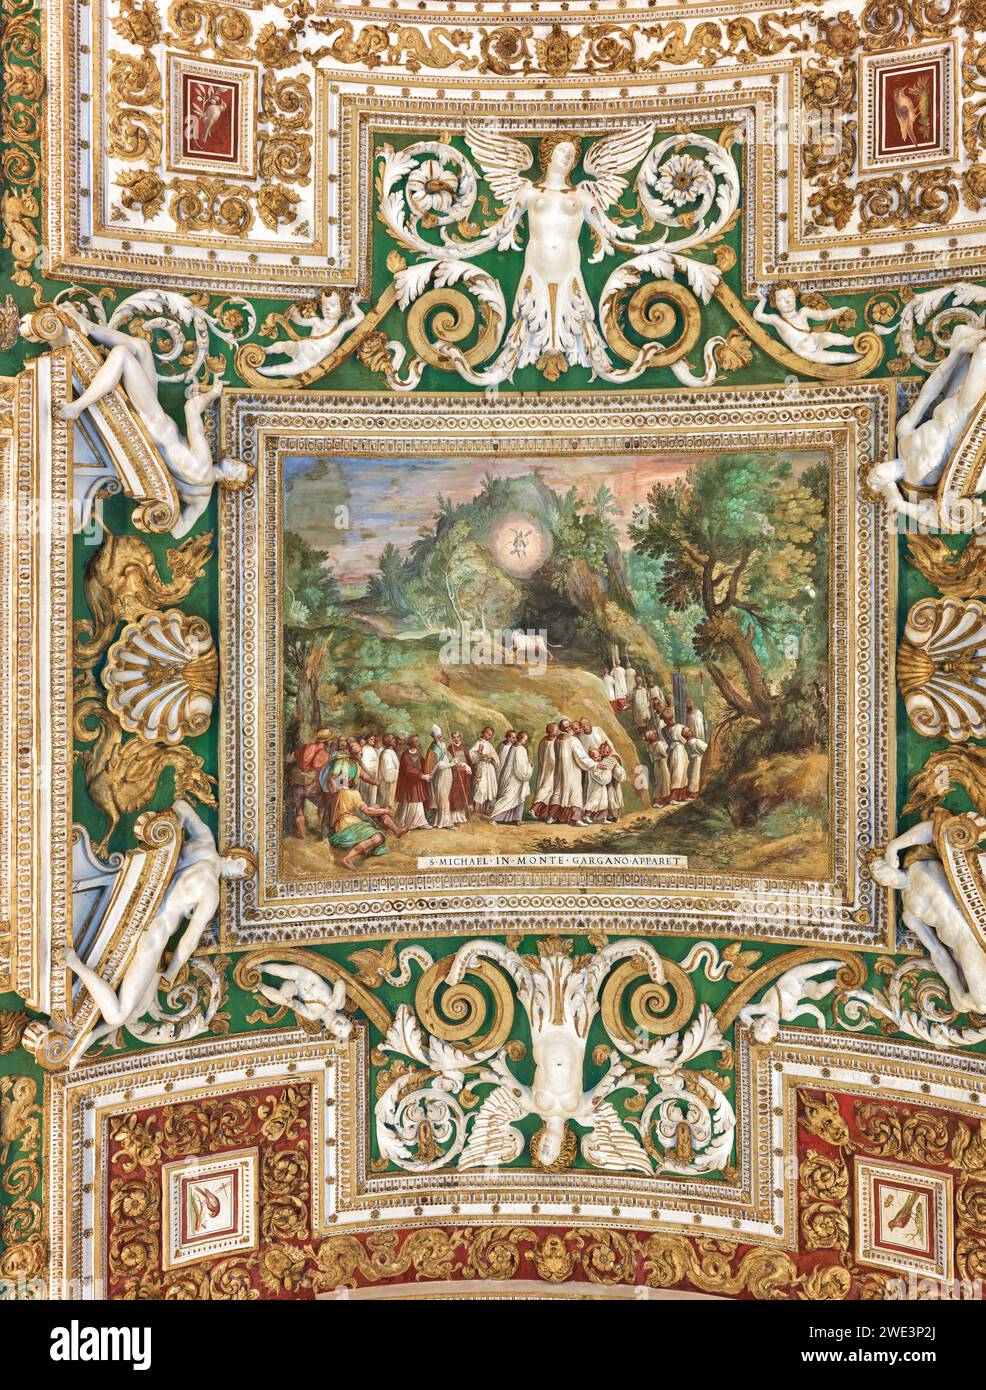 Painting (St Michael appears in Monte Gargano) and decorations on the ceiling in the gallery of geographical maps, Vatican museum, Rome, Italy. Stock Photo